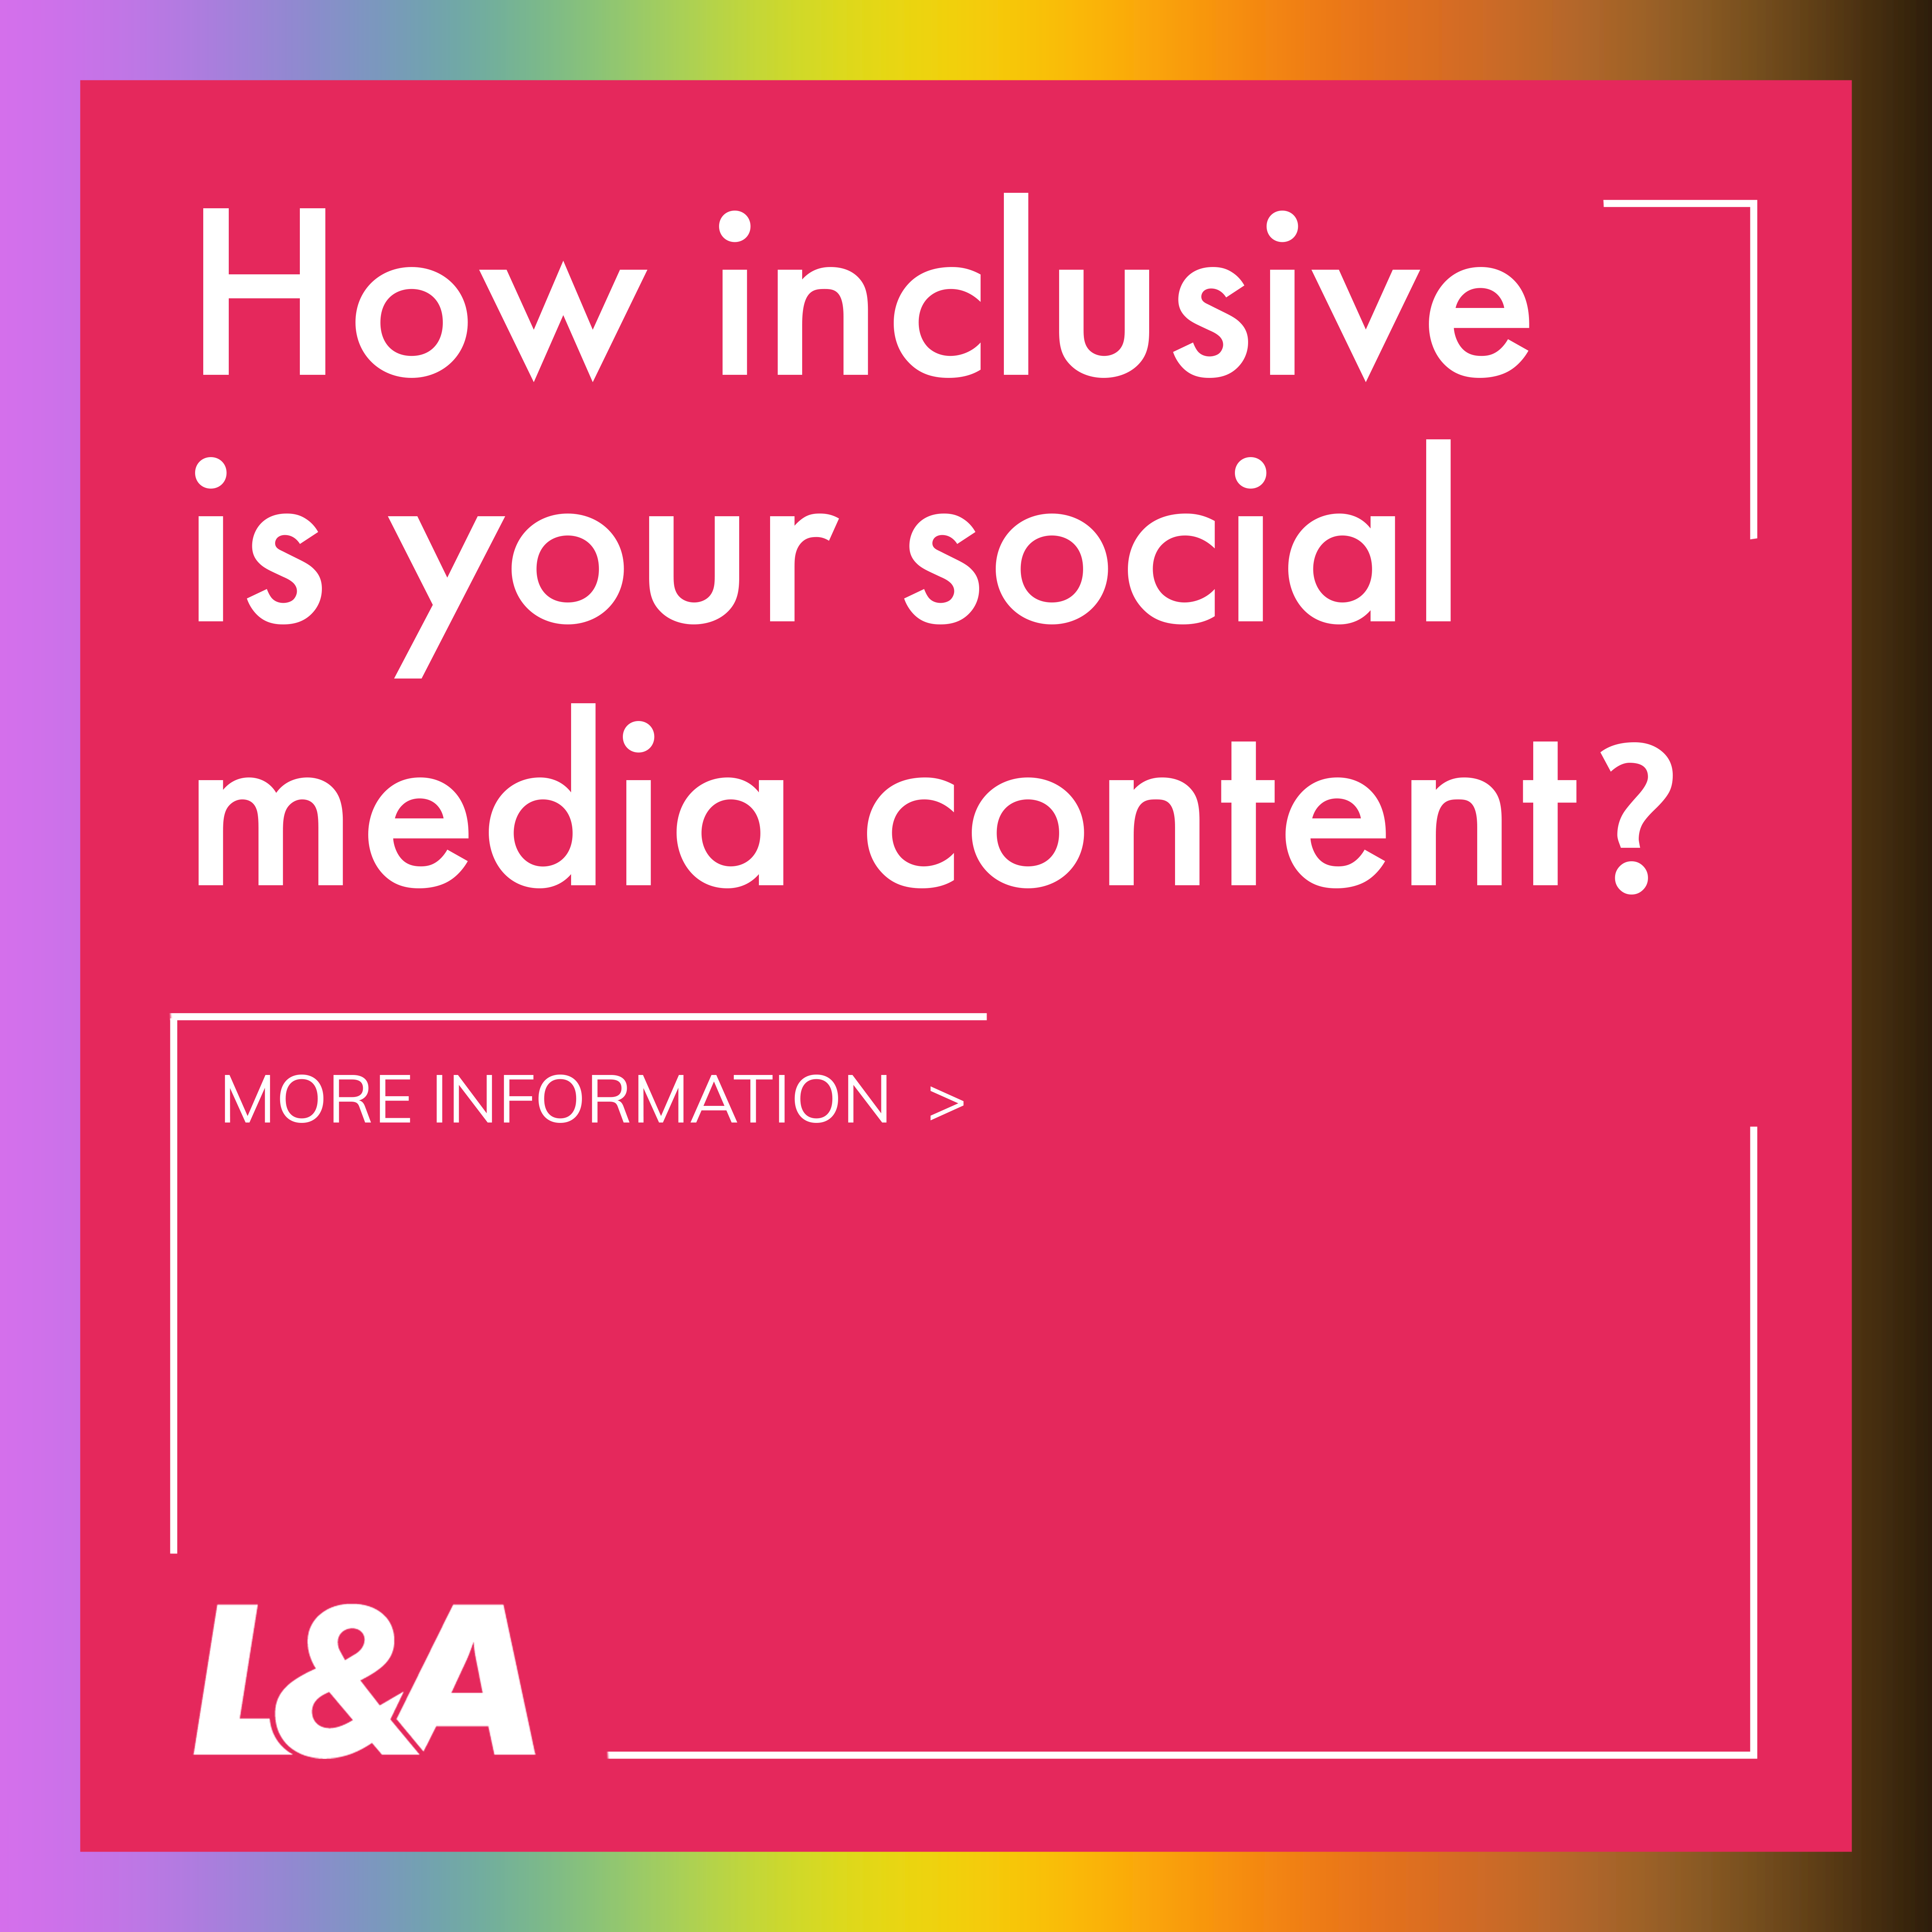 Artboard 1 - How inclusive is your social media content?